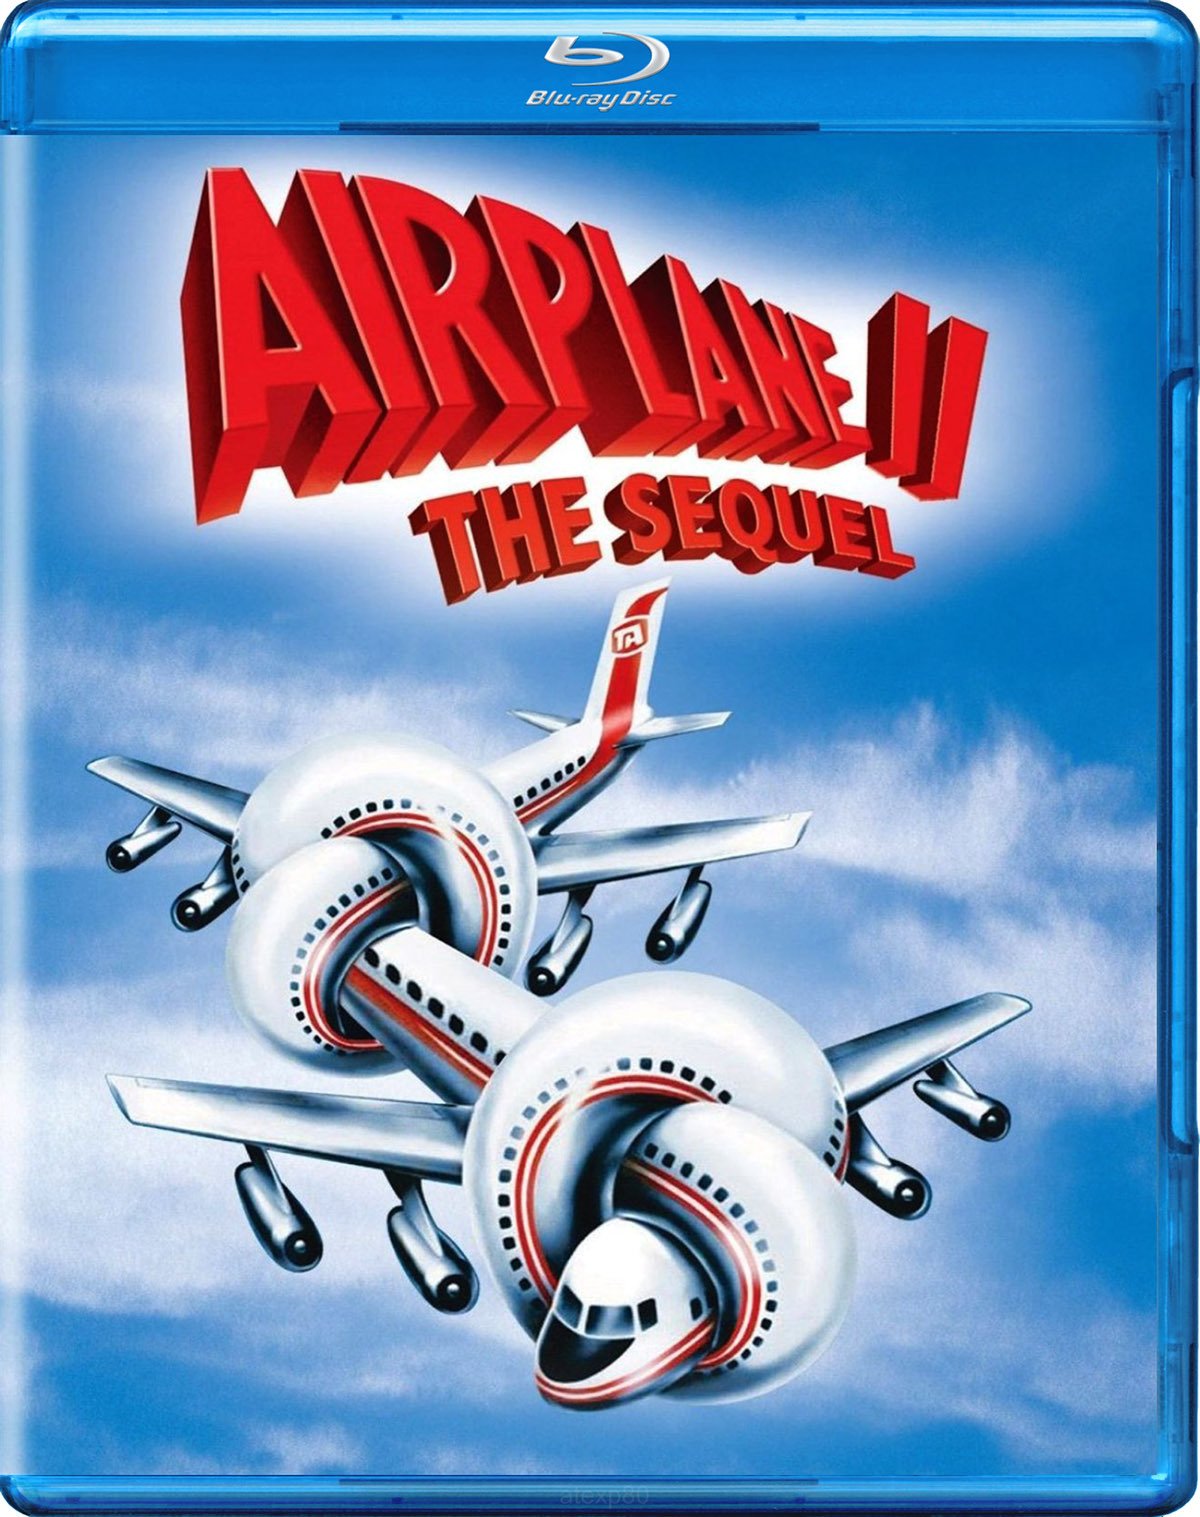 1982 Airplane II: The Sequel